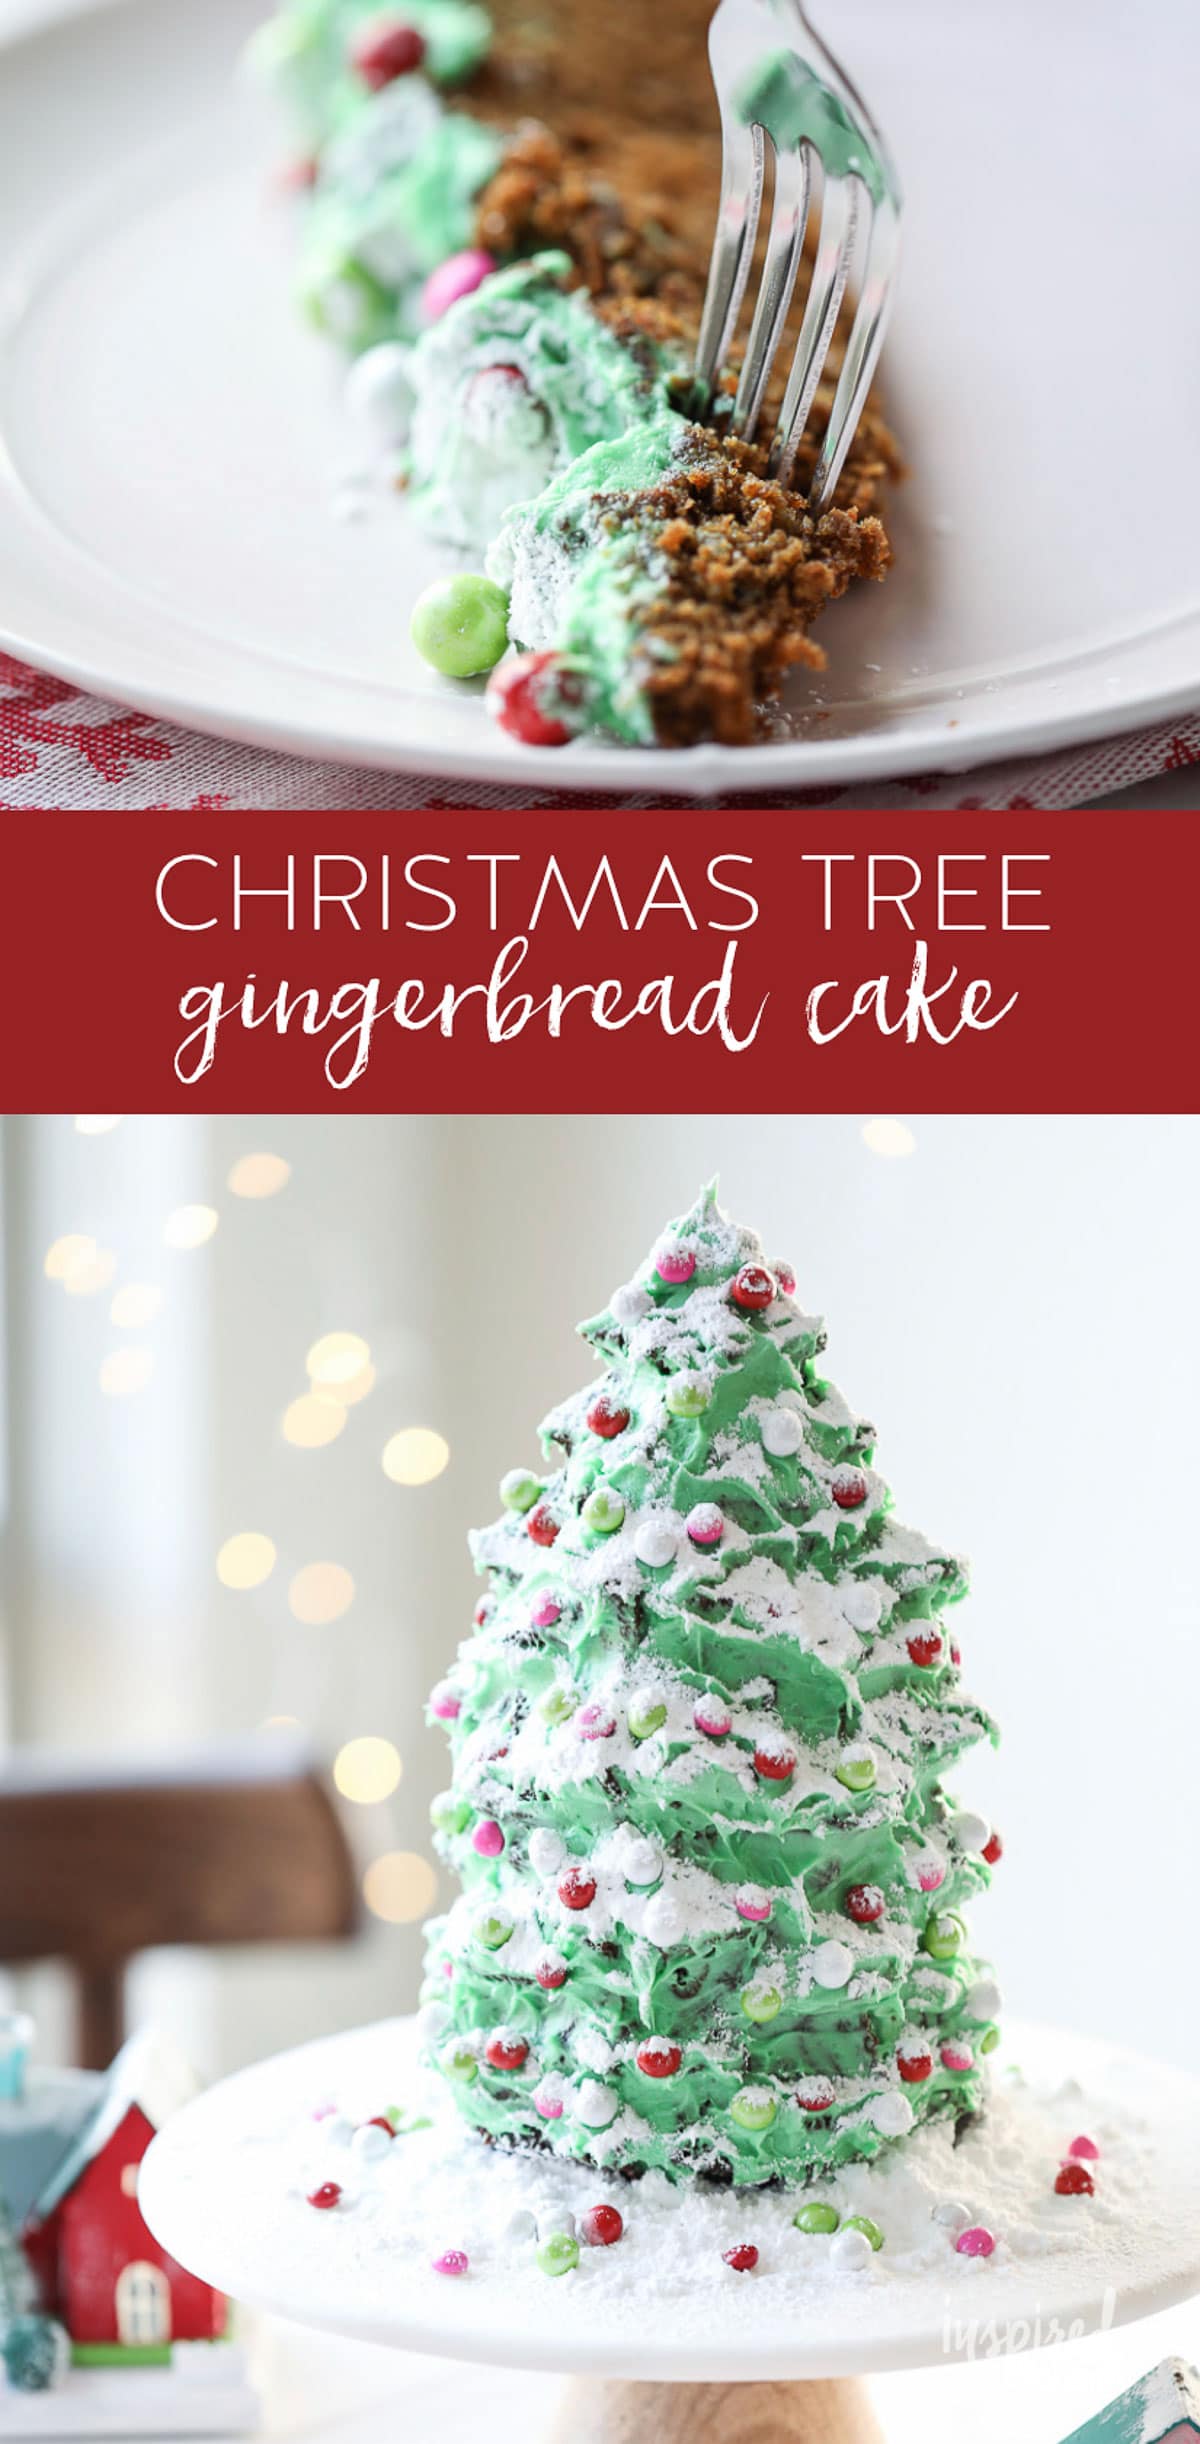 Tree-shaped Gingerbread Cake for Christmas #gingerbread #tree #cake #dessert #recipe #christmas #holdiay